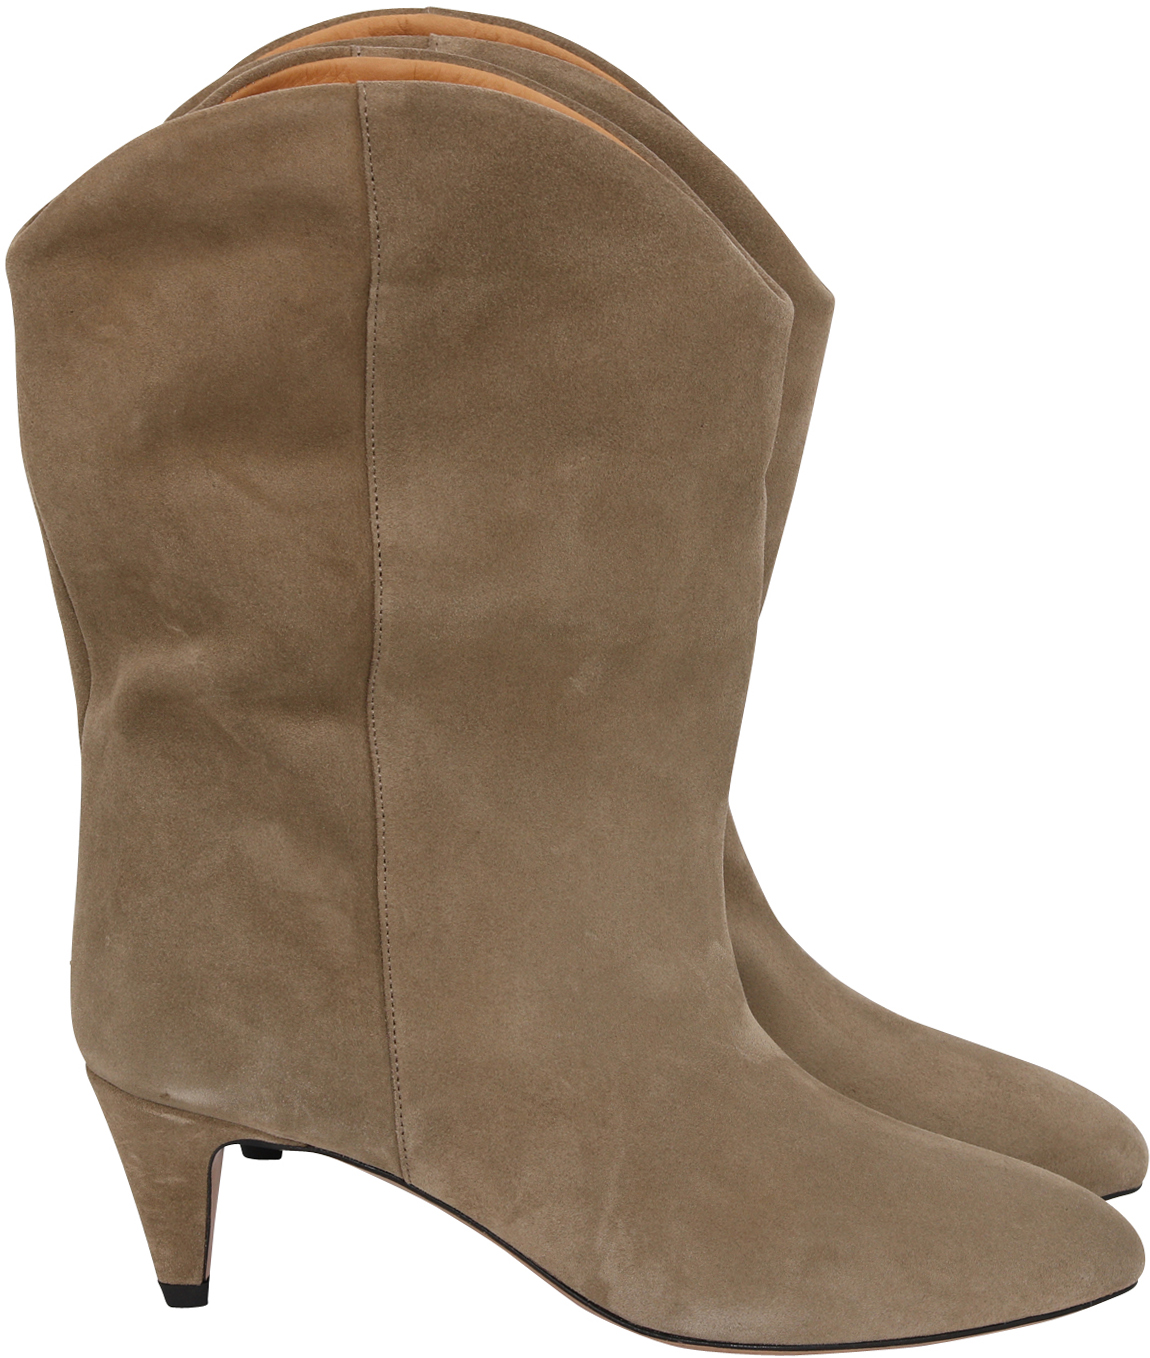 Isabel Marant High Boots Dernee Taupe Suede 39